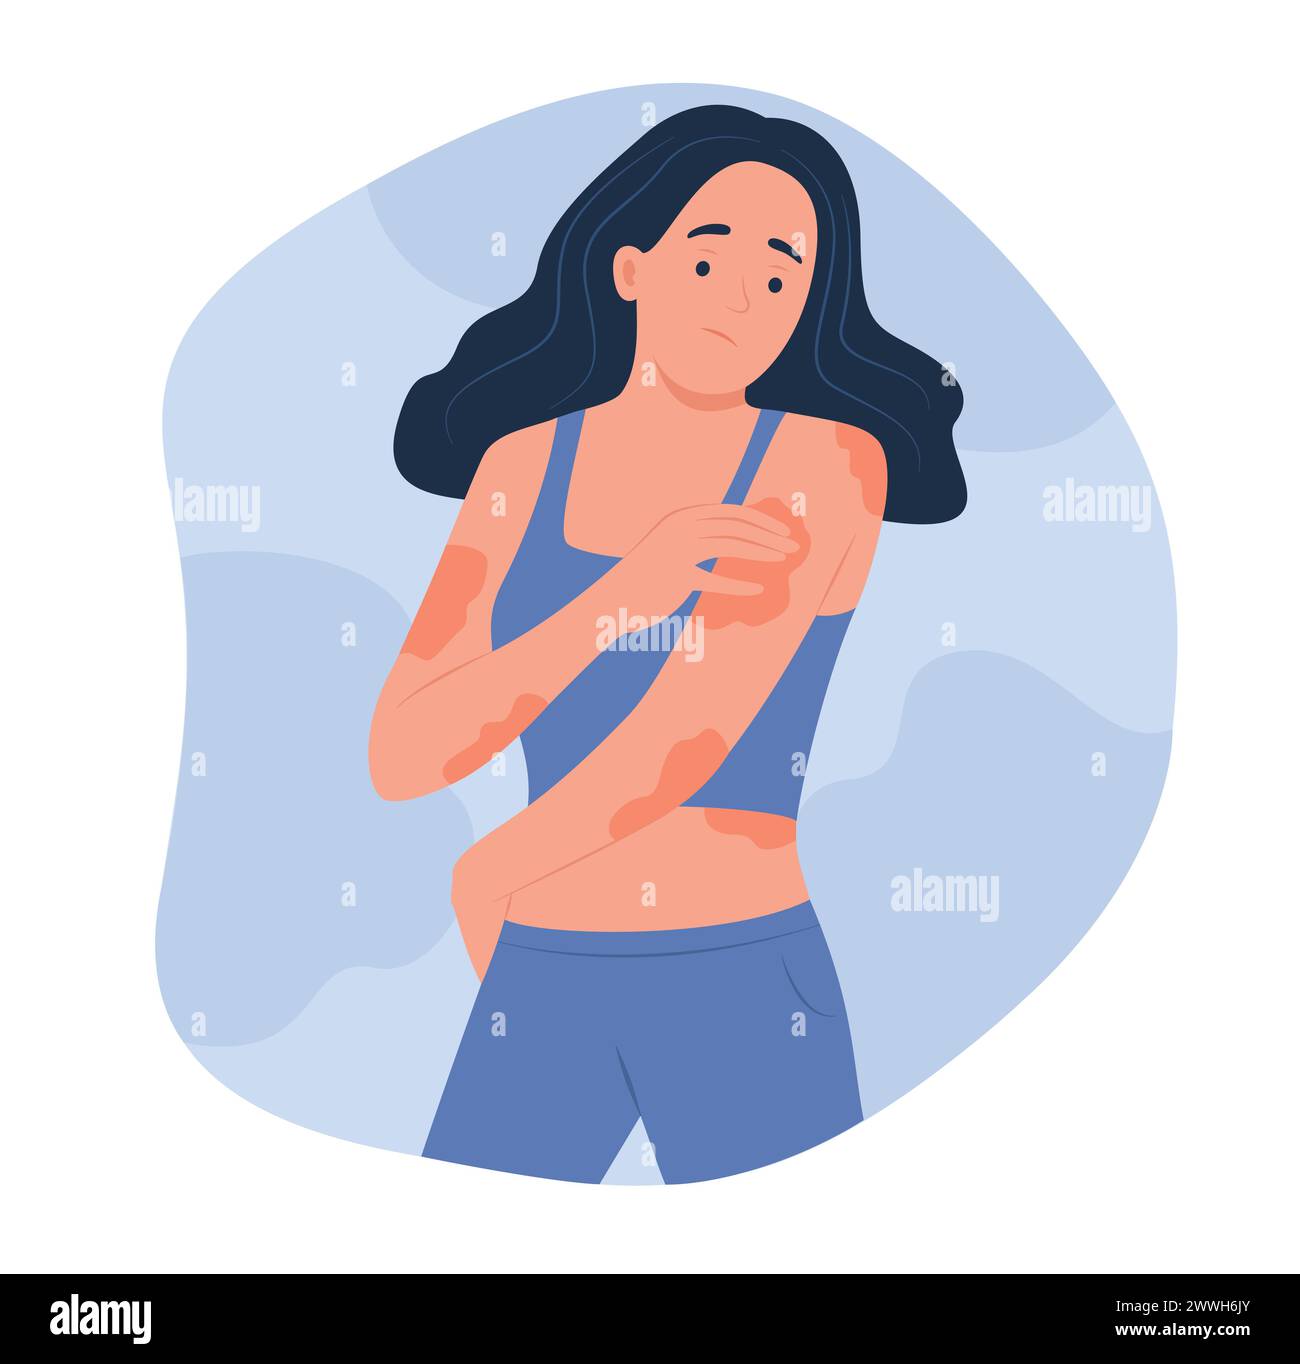 Woman with Eczema on Body for Dermatology Concept Illustration Stock Vector